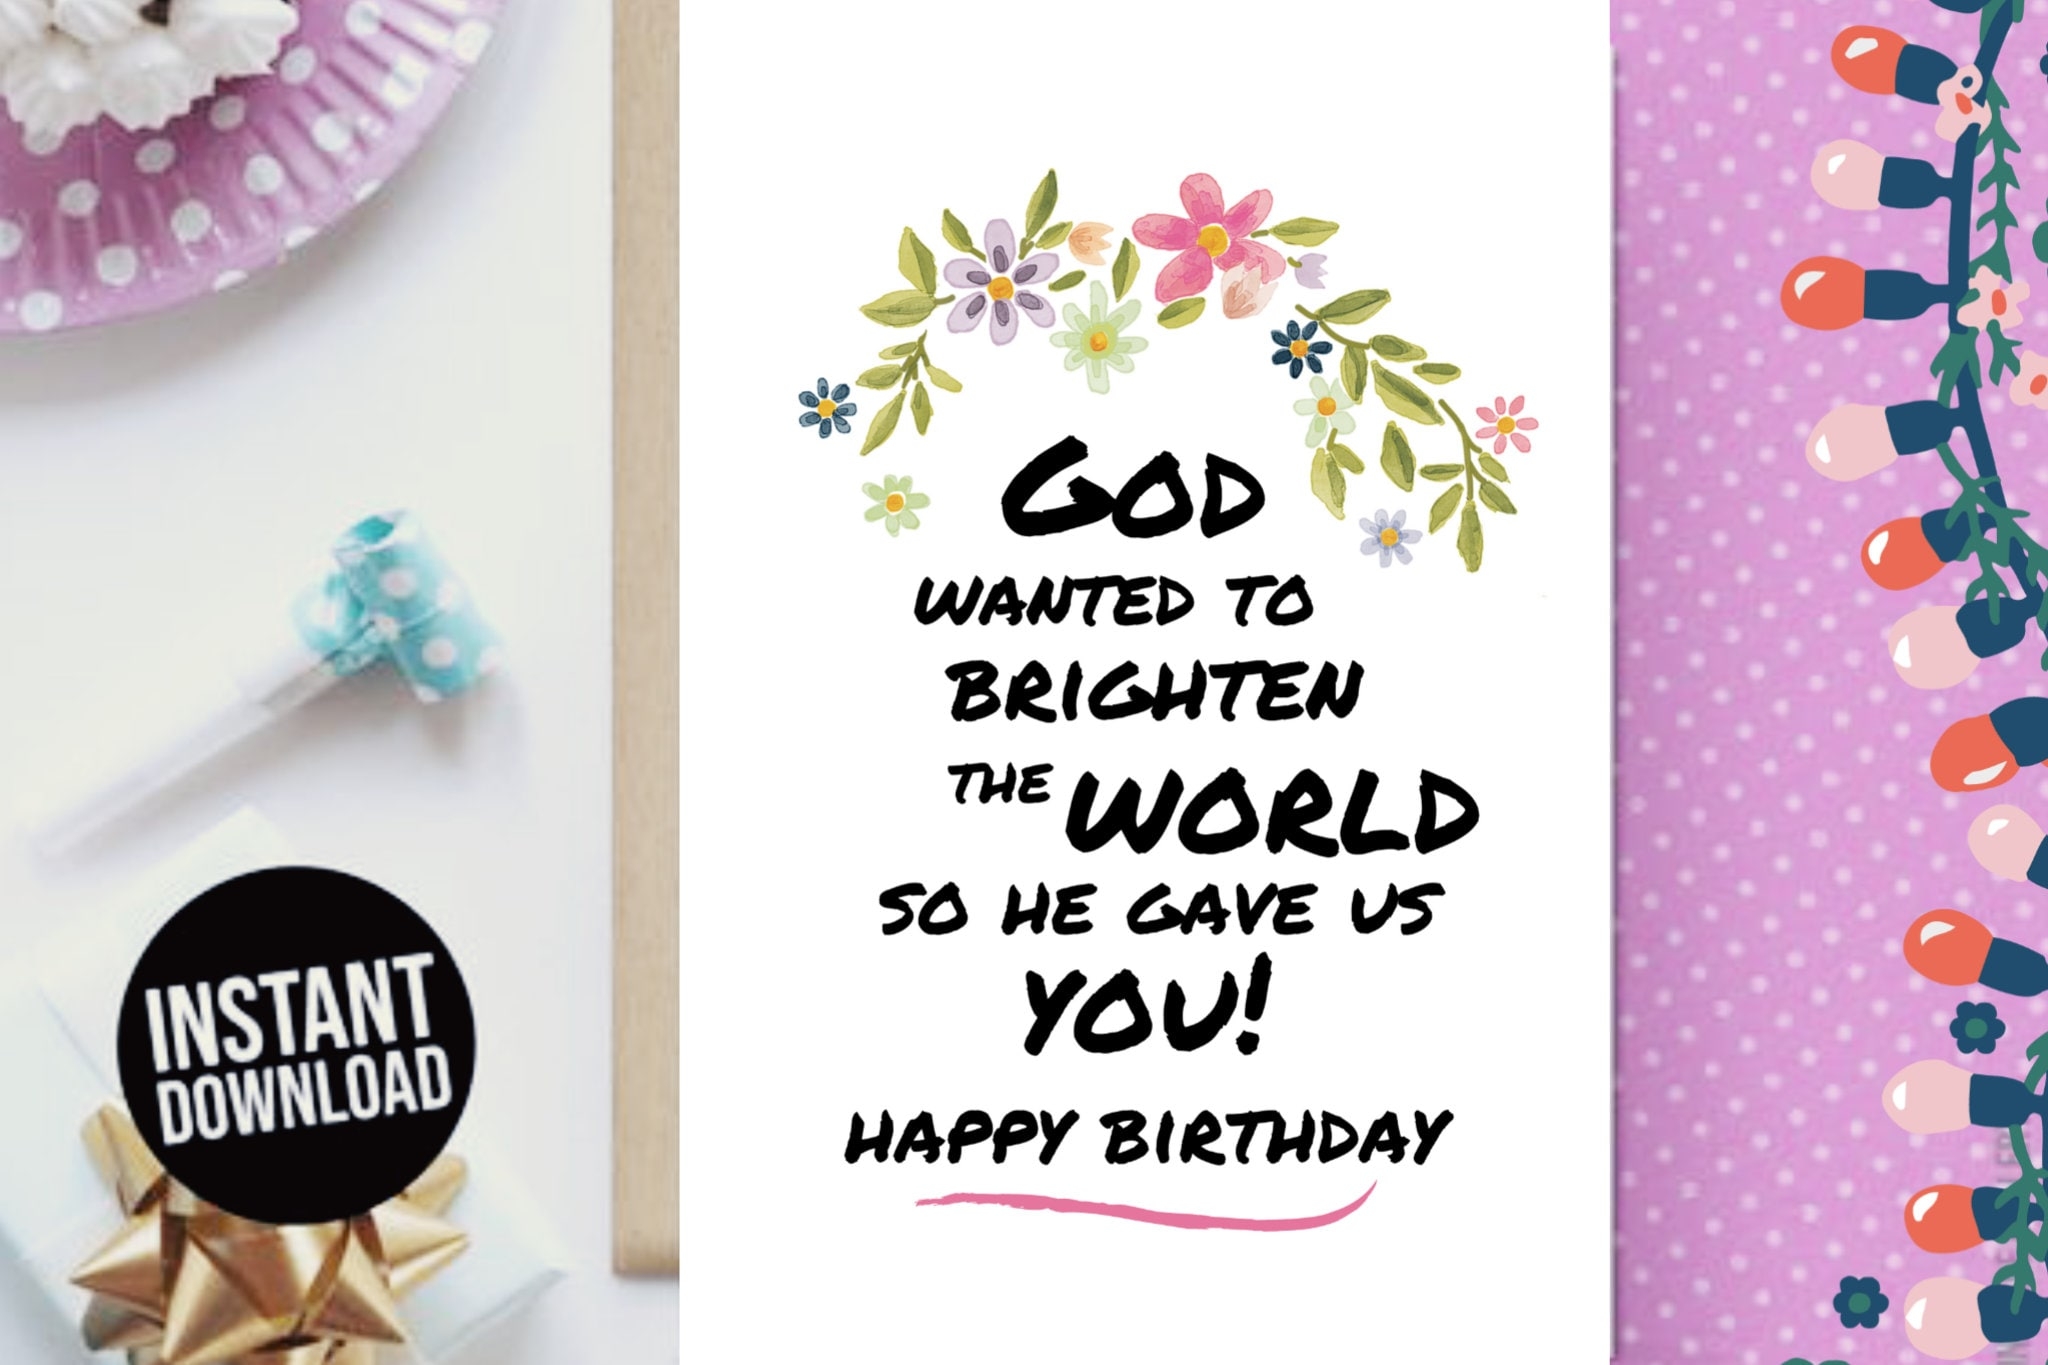 Downloadable Birthday Card God s Love Christian Greeting Card Printable Digital Card Instant Download Birthday Print At Home Brighter World Etsy - Free Printable Christian Birthday Greeting Cards